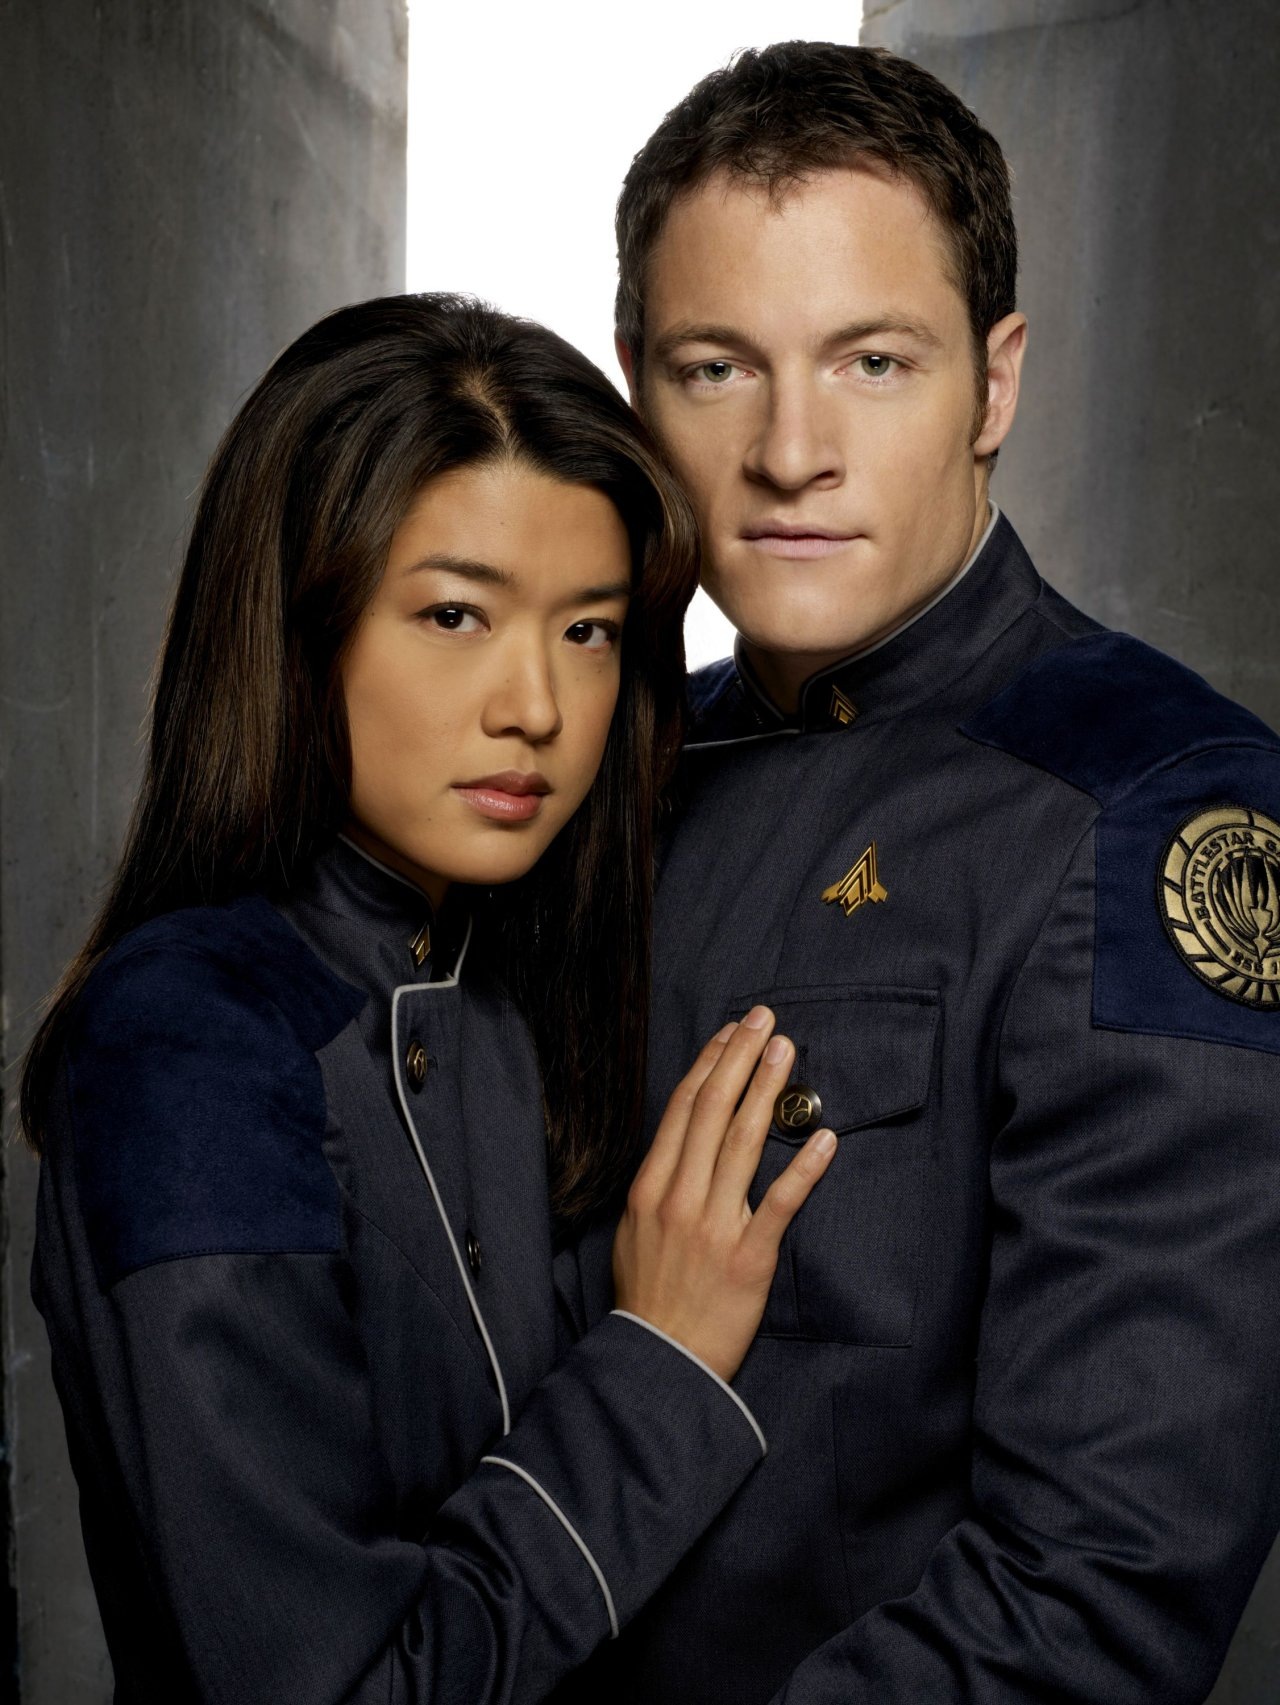 Grace Park leaked wallpapers